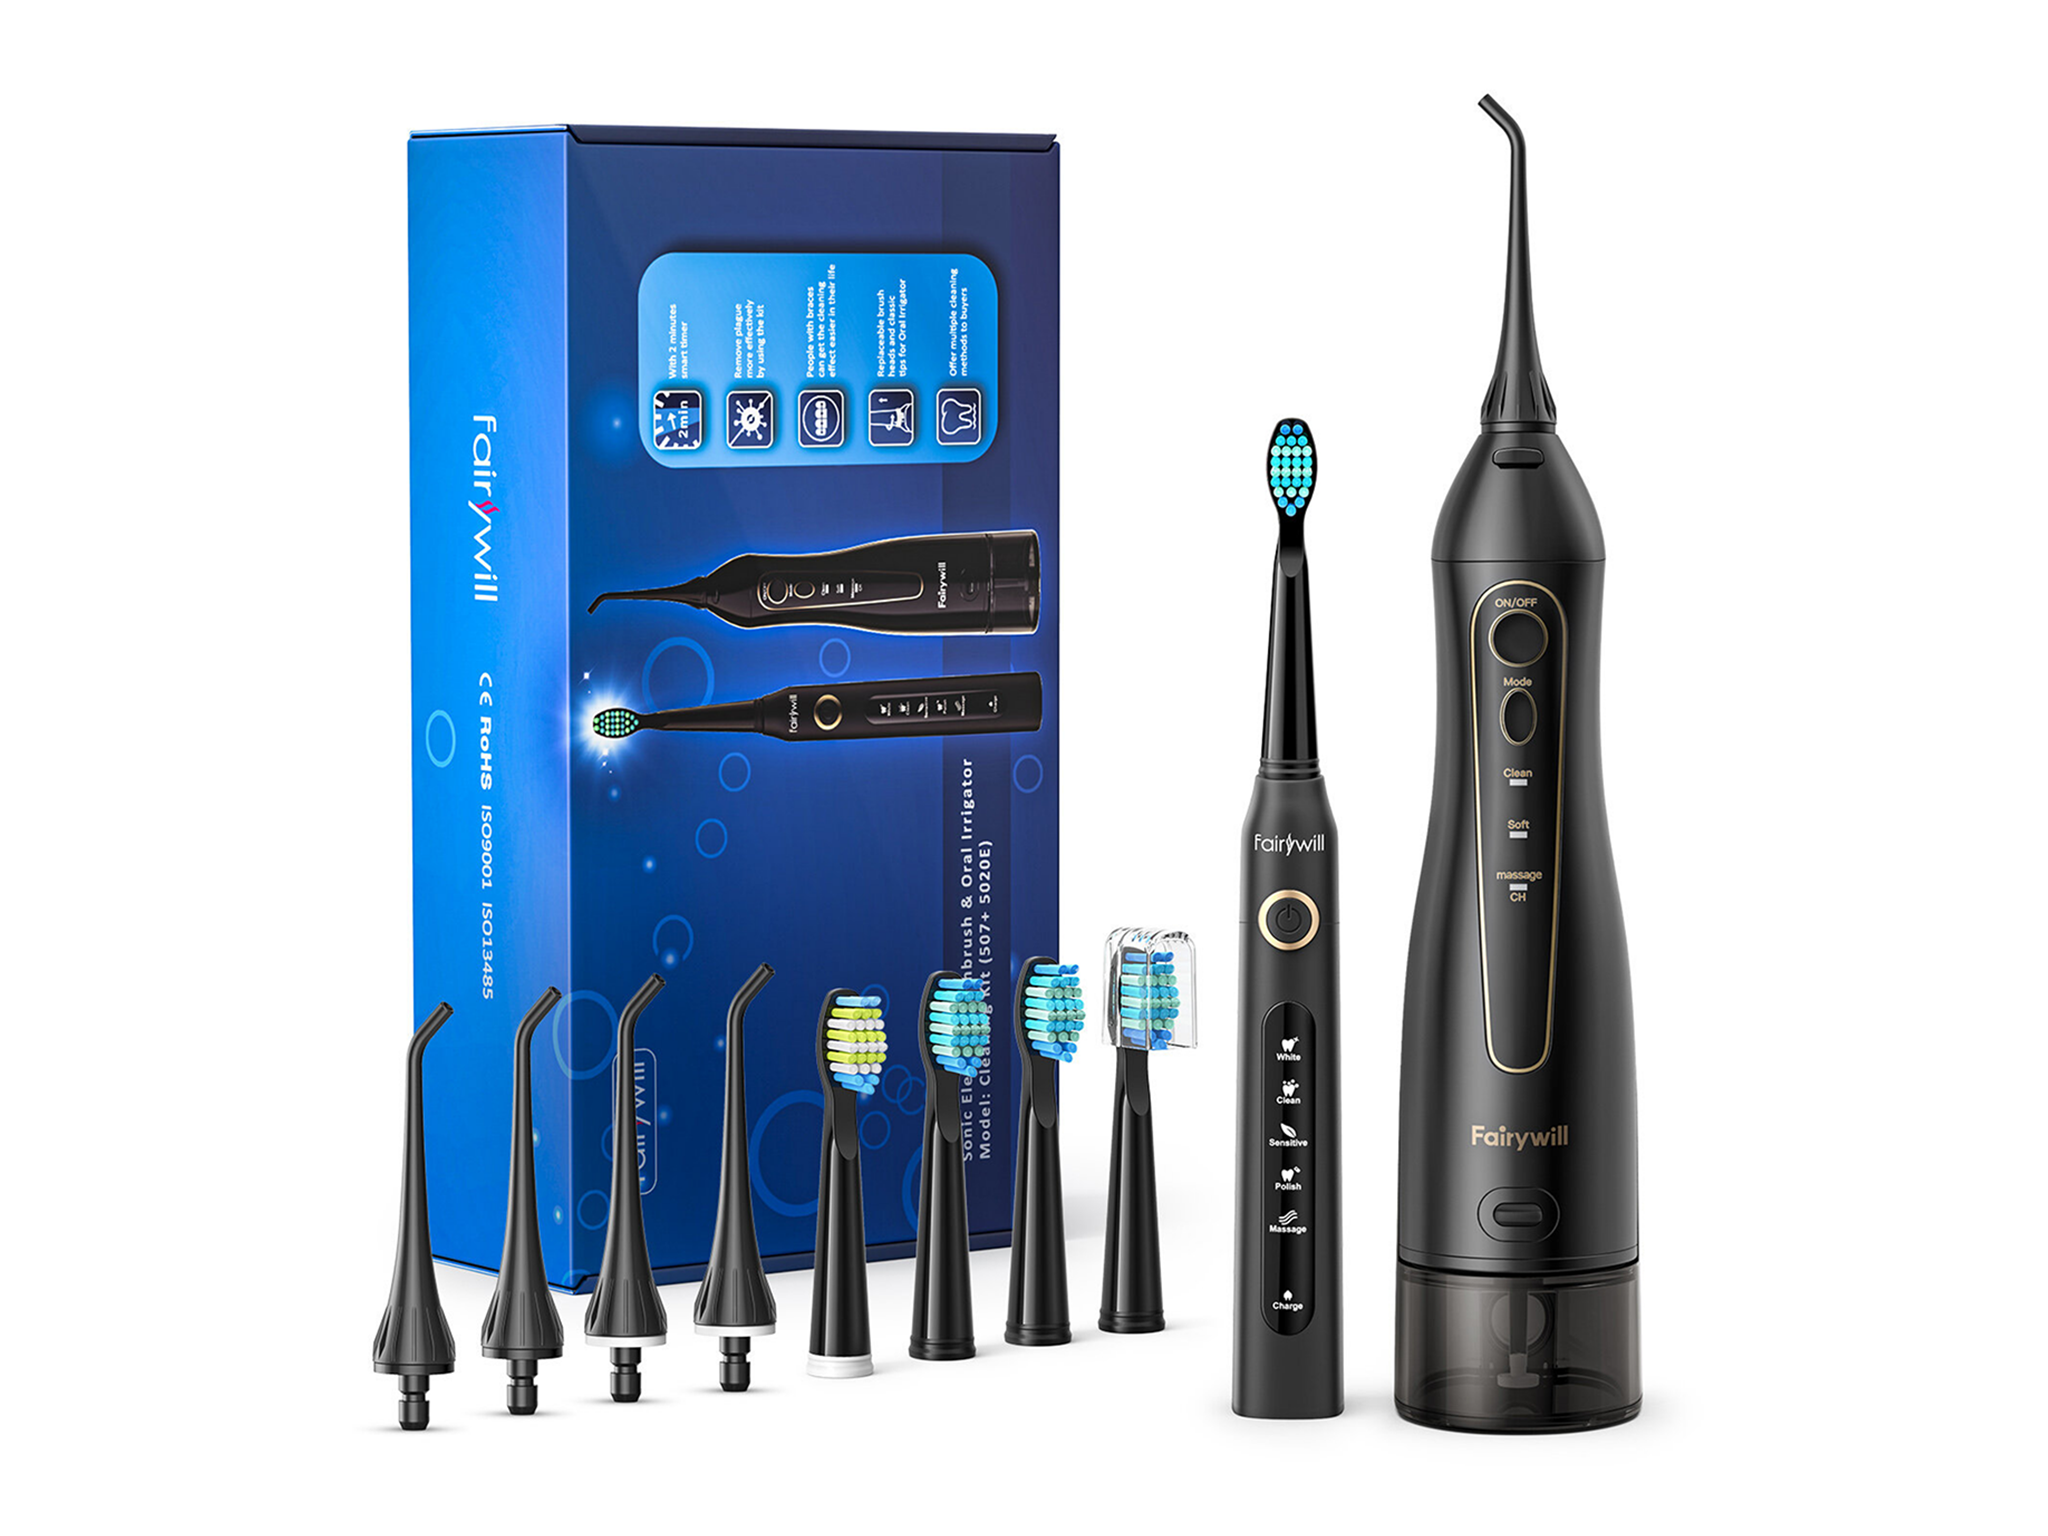 Fairywill electric toothbrush + cordles oral irrigator water flosser.png